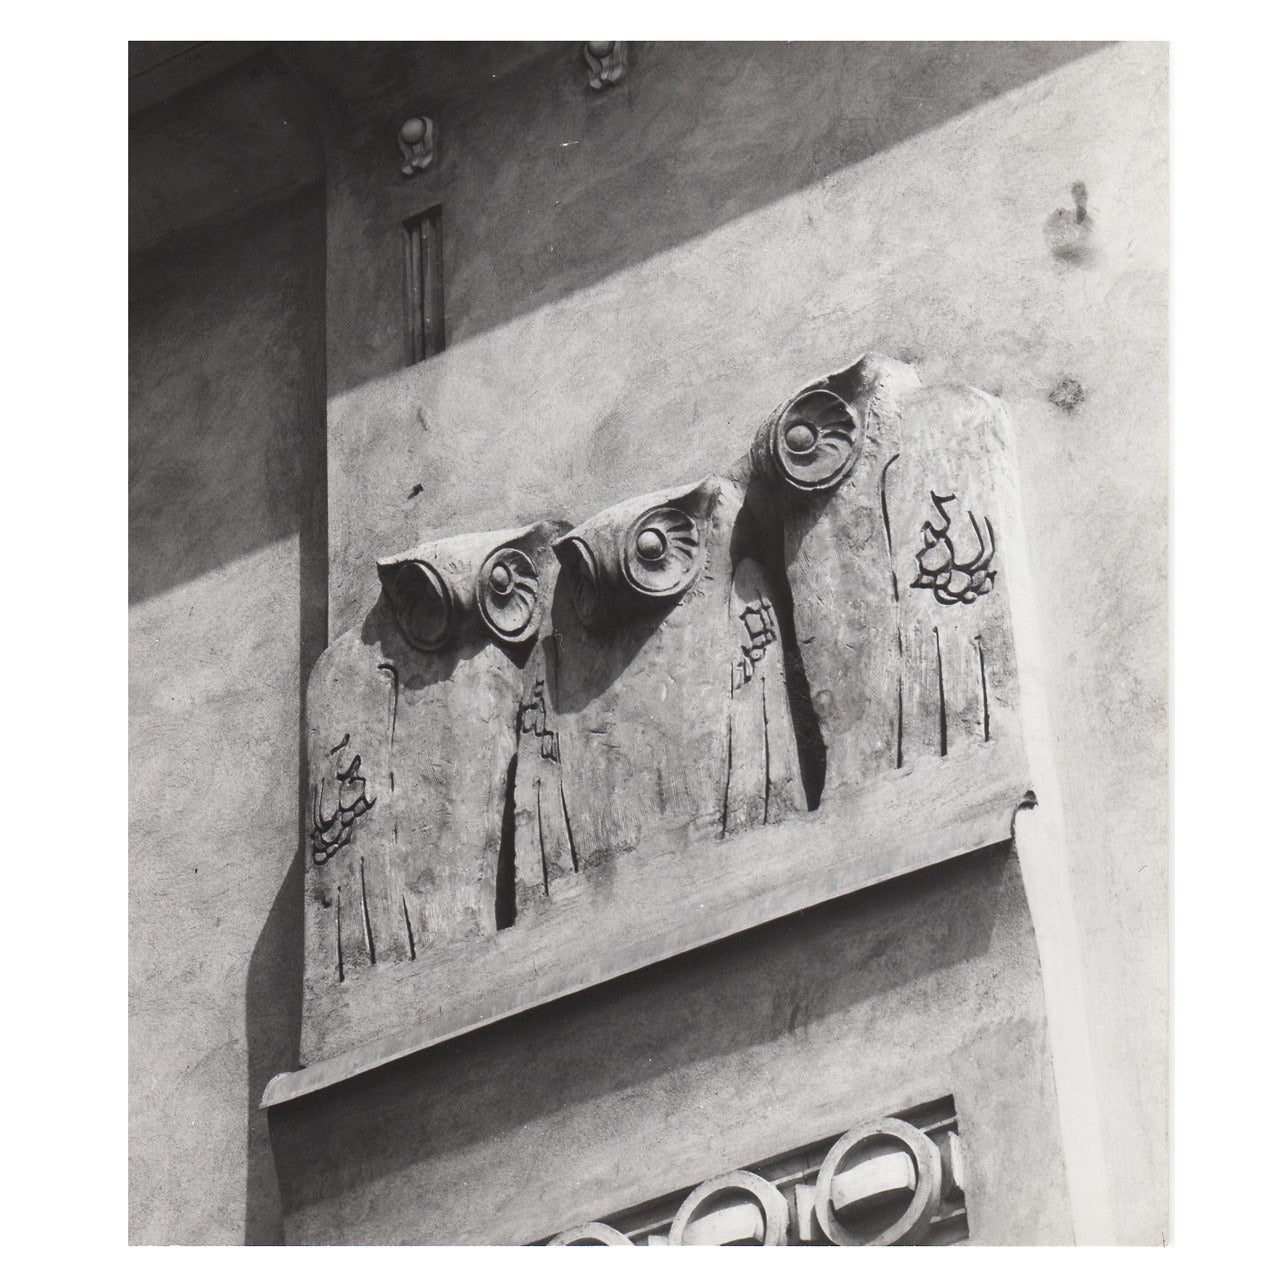 Lucca Chmel Photograph Details of the Secession, Vienna "the Owls" For Sale